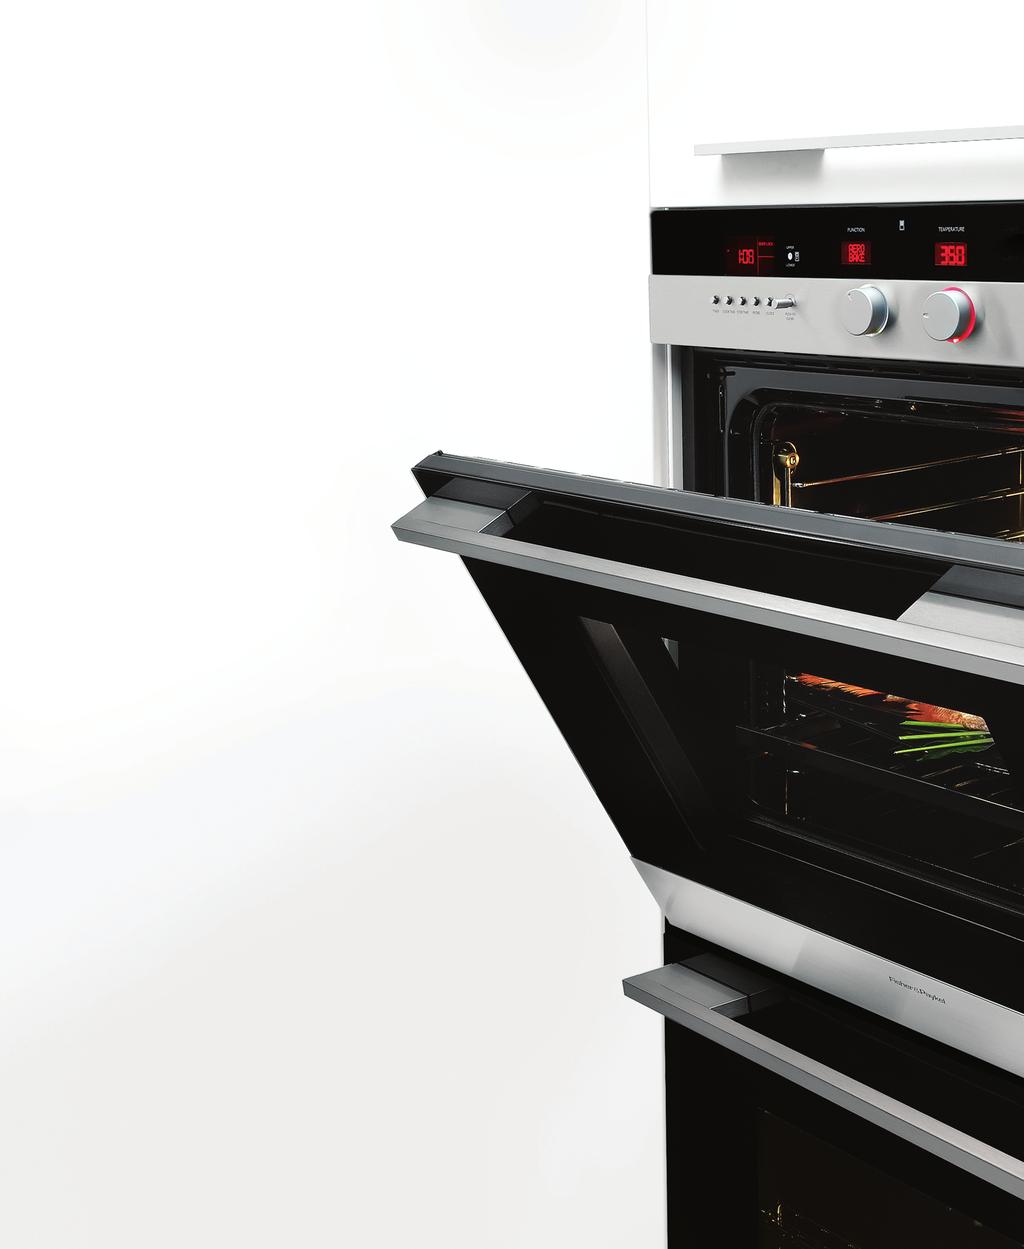 30 large capacity oven KEY FEATURES Fisher & Paykel large capacity ovens are visually impressive at 30 wide, they deliver outstanding performance and have innovative features that make it easy to